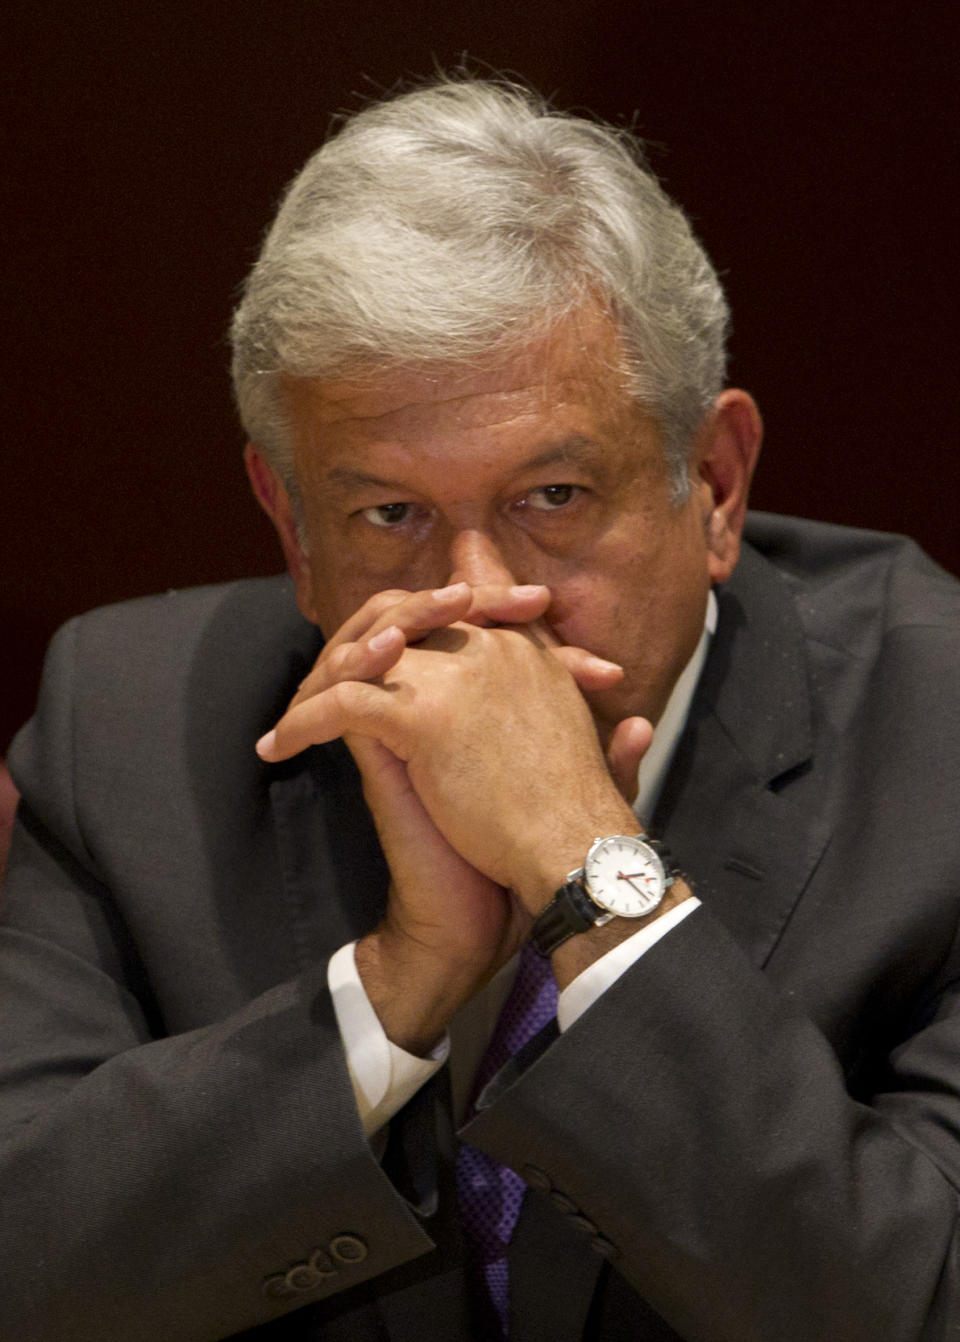 Andres Manuel Lopez Obrador, presidential candidate for the Democratic Revolution Party (PRD), attends a news conference in Mexico City, Thursday, July 12, 2012. Lopez Obrador says he will ask an electoral court to invalidate the results of the July 1 presidential election, charging there was vote buying and campaign overspending by the winner of official vote counts. (AP Photo/Eduardo Verdugo)